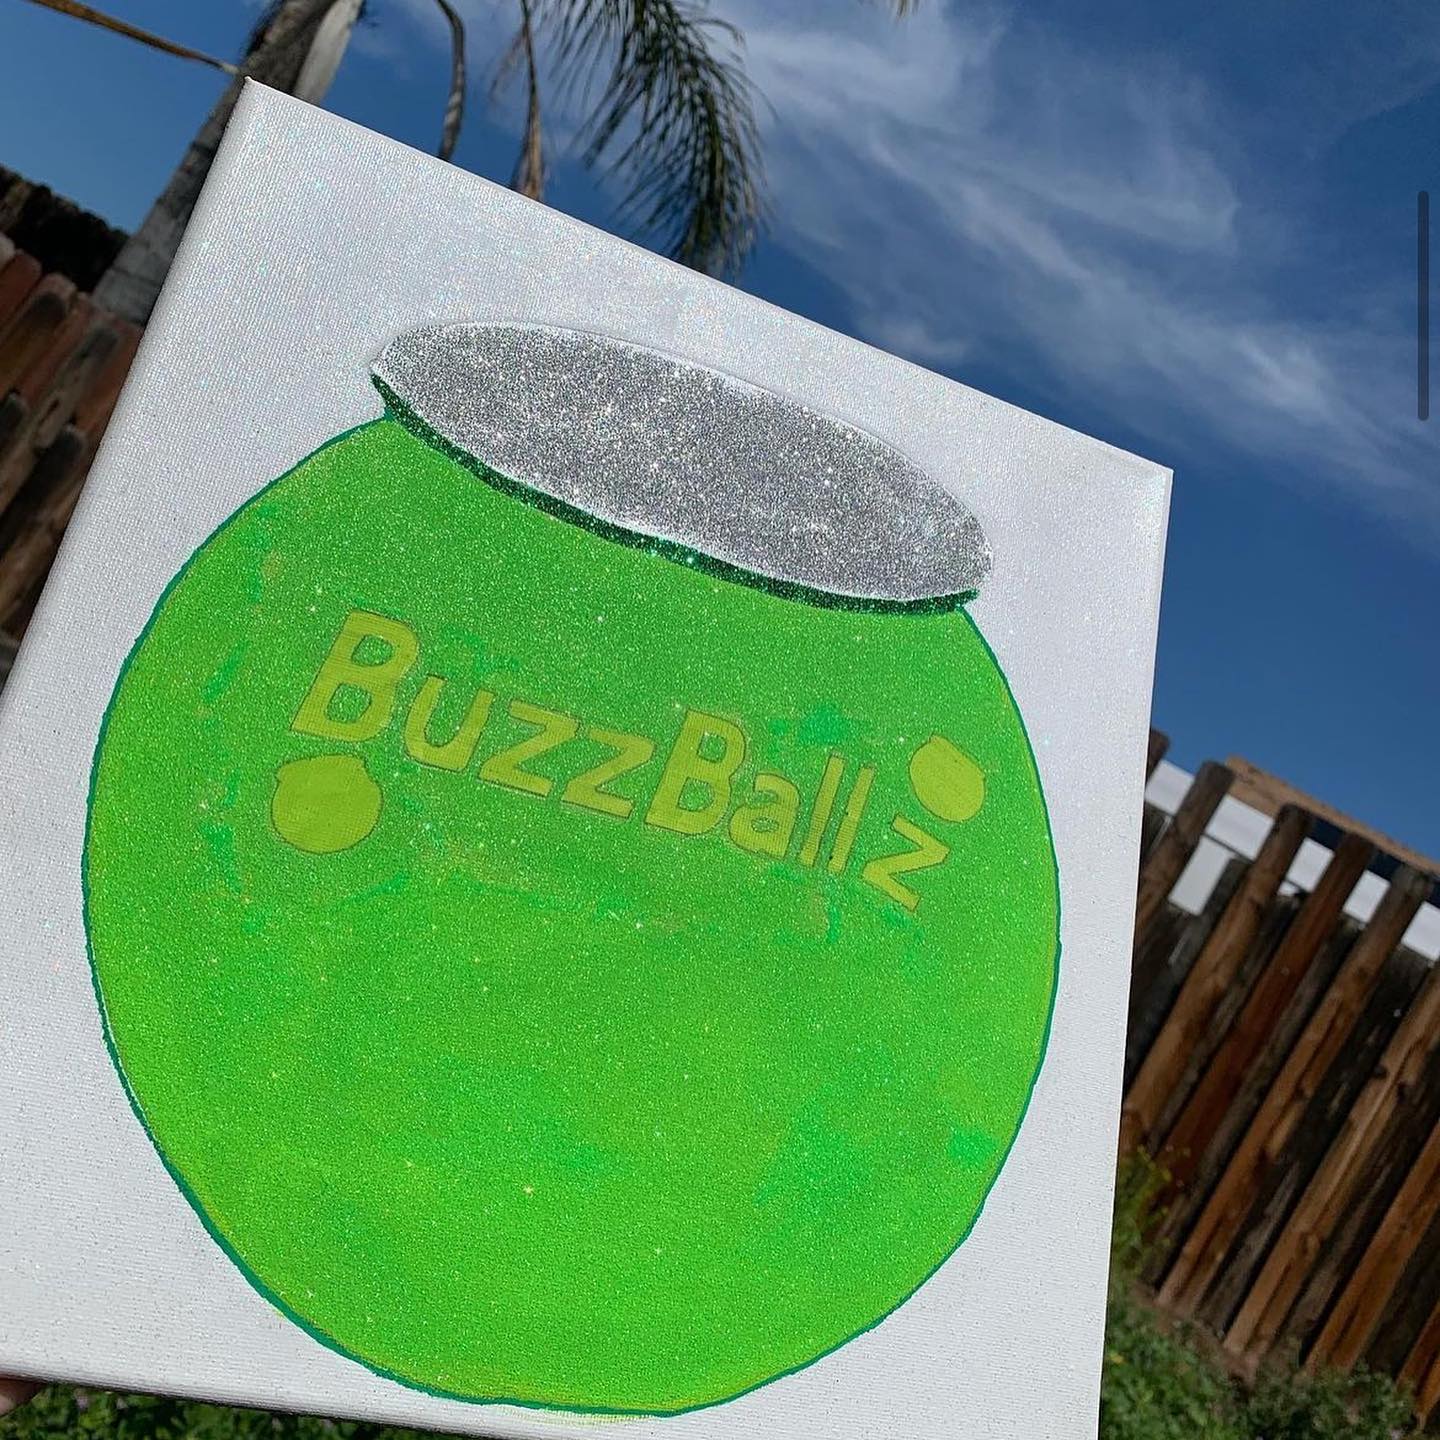 What will BuzzBallz be your muse for next? 

We love seeing how BuzzBallz inspires your creativity, tag us so we can share some love on your creations! 

@universal_char 
@chulasfloreria 
@tuftlove.creations